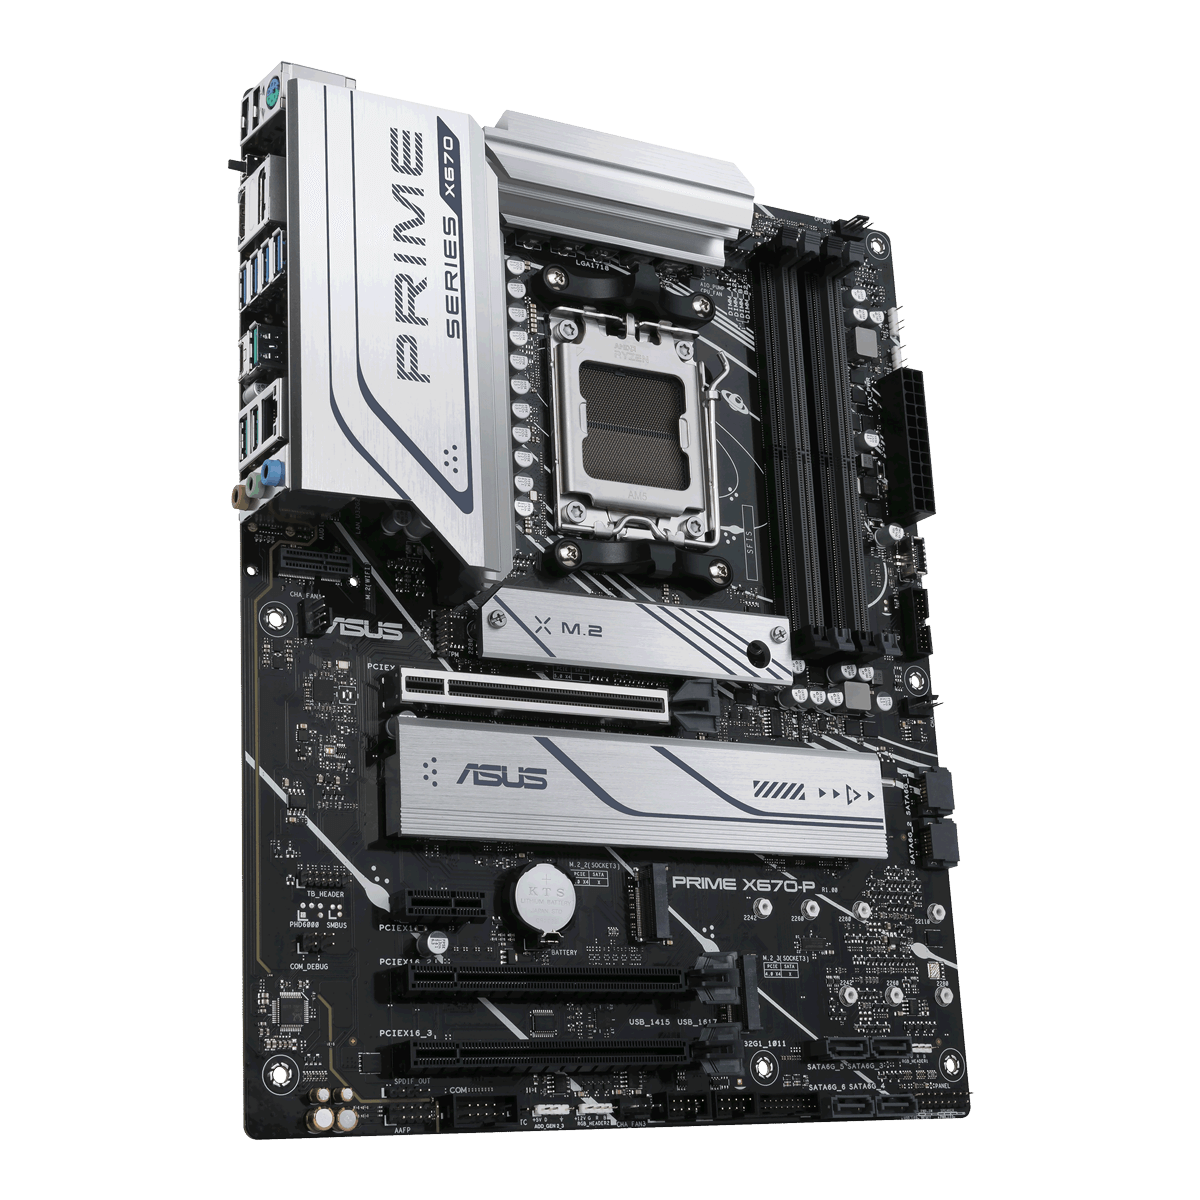 The PRIME X670-P motherboard features Aura Sync. 